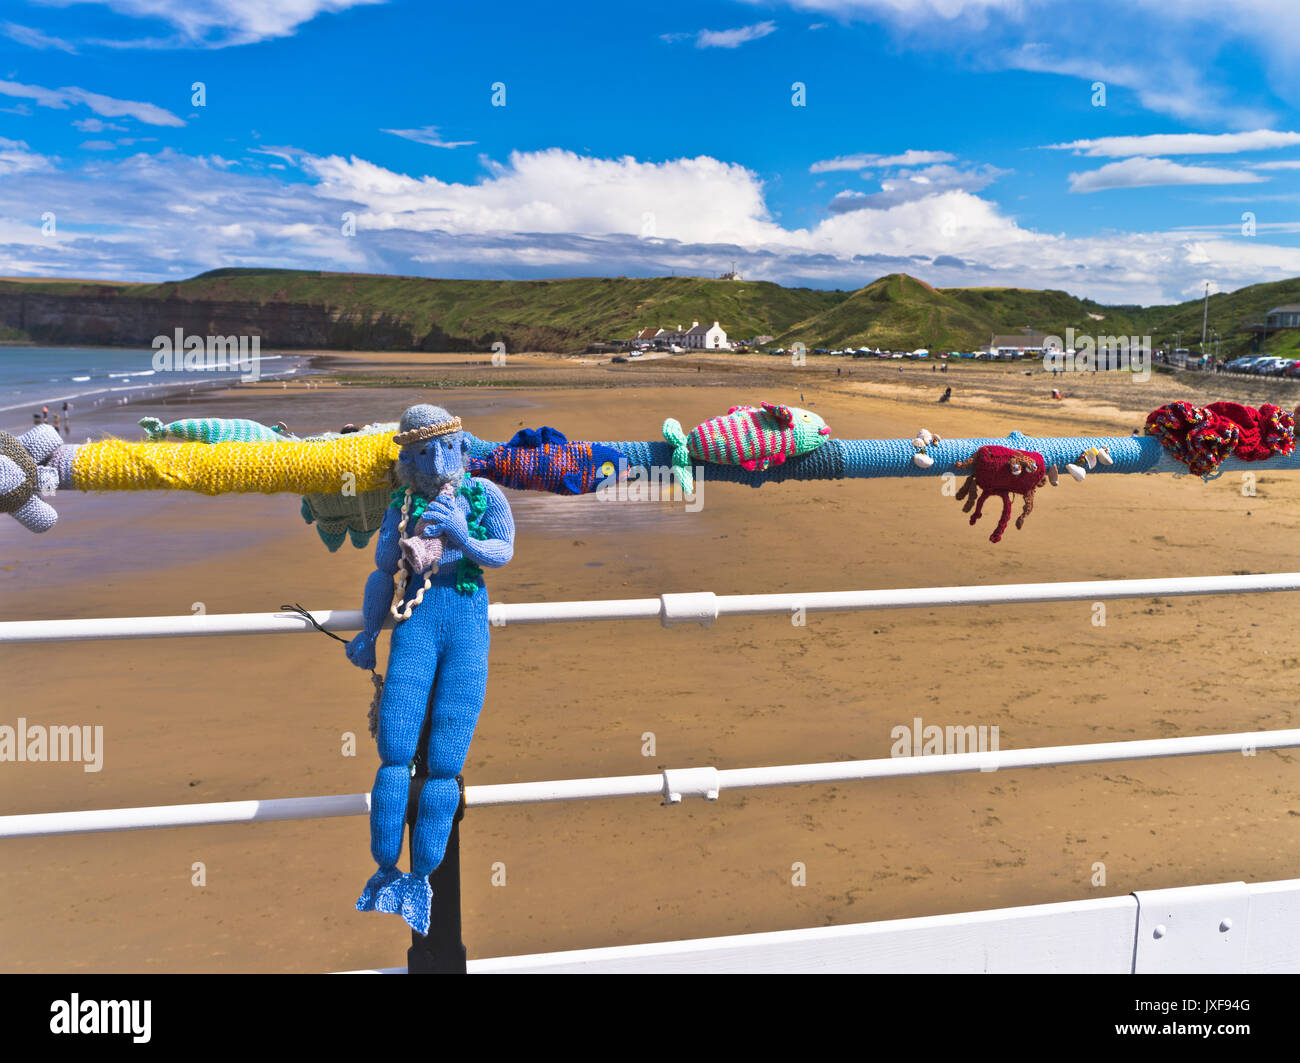 dh Guerilla knitting pier SALTBURN BY THE SEA CLEVELAND Knitted sea figures Neptune crochet yarn bombing storming knit urban art Stock Photo